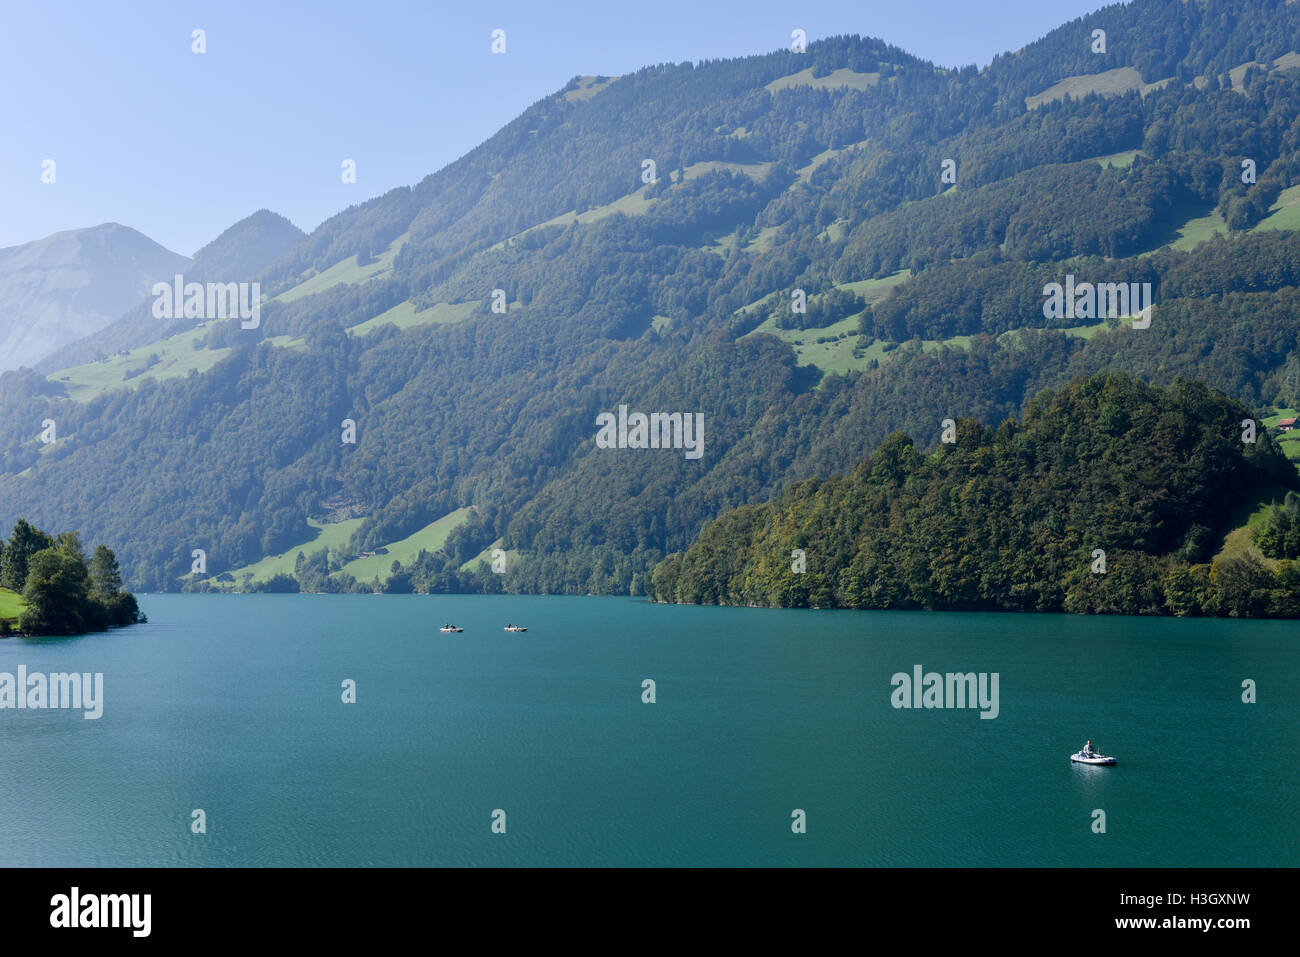 Lungern, Switzerland - 24 September 2016: People fishing on them boats at lake Lungern on Canton Obwalden in Switzerland Stock Photo